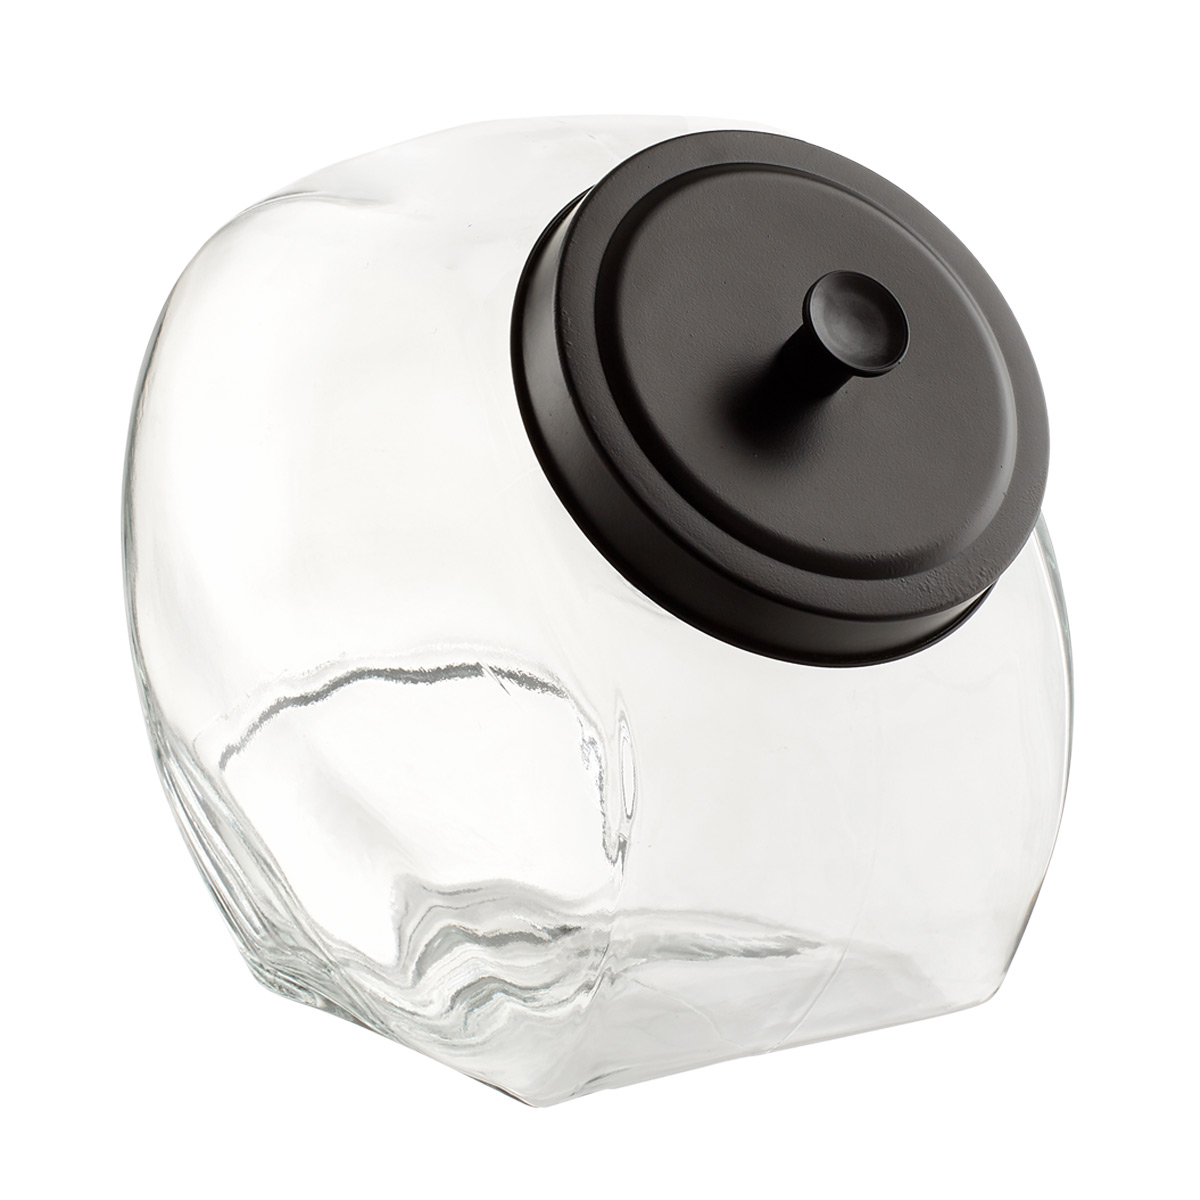 https://www.containerstore.com/catalogimages/344210/10074988-1gal-glass-slant-canister-m.jpg